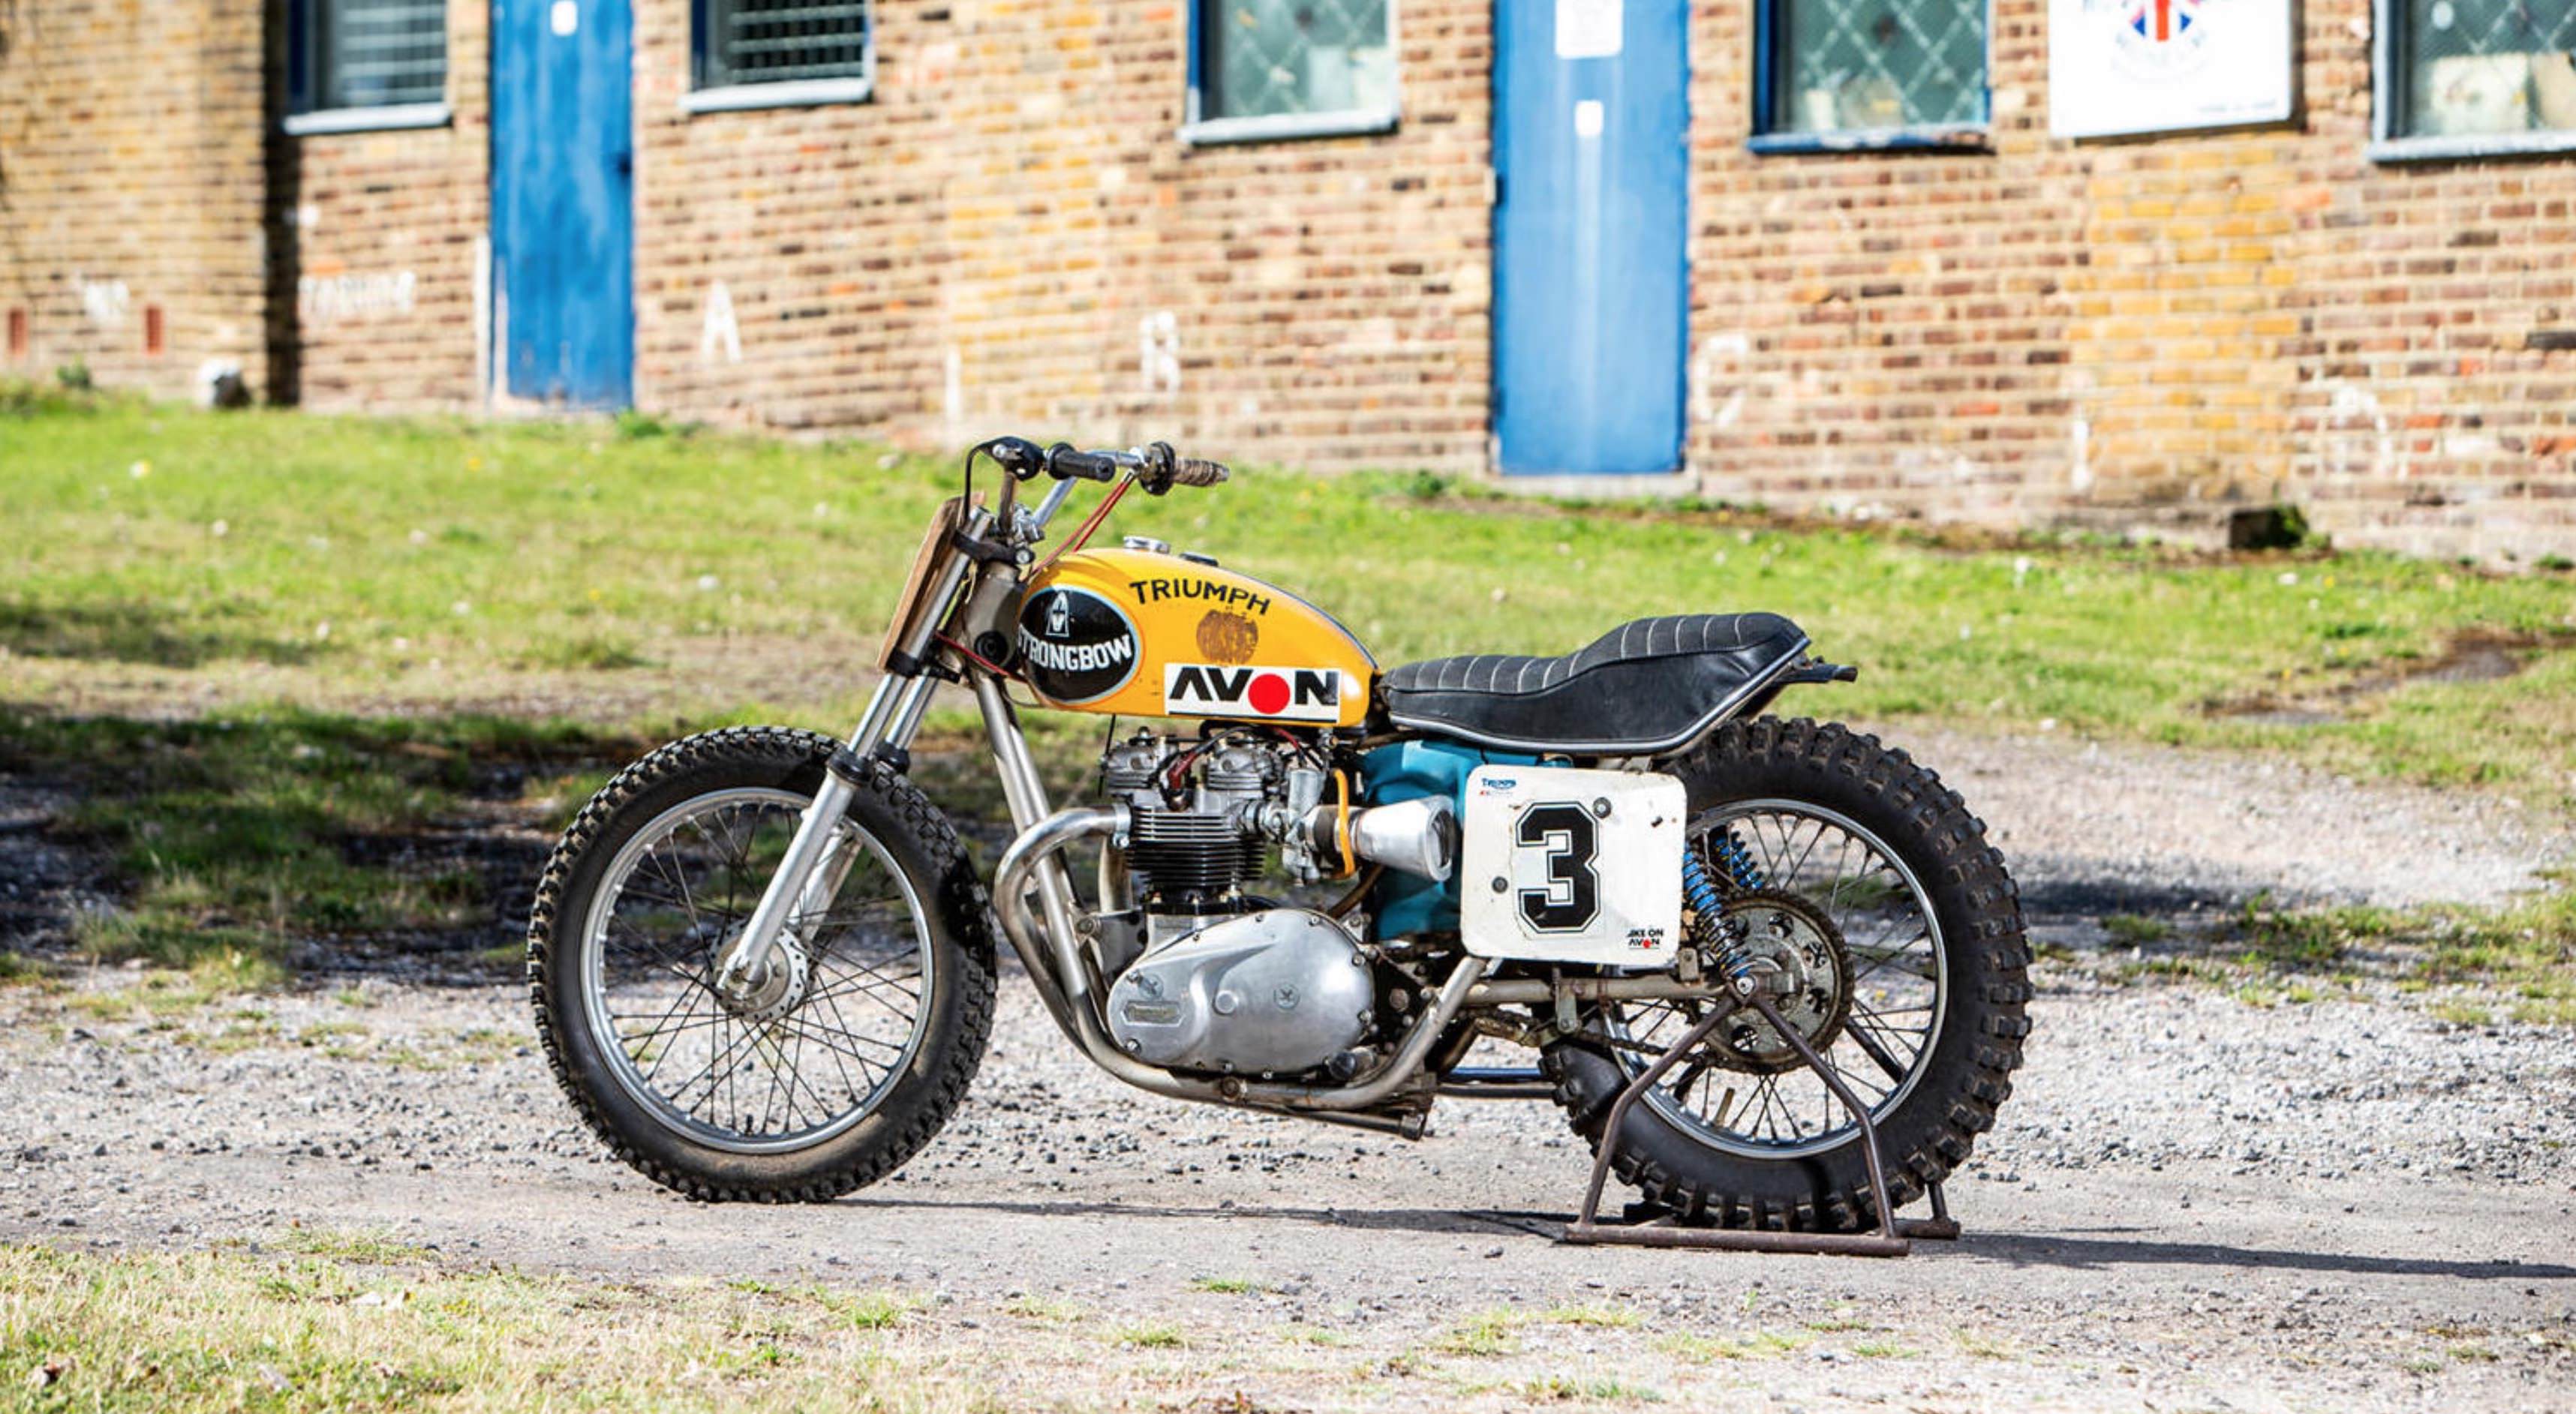 The Only Surviving Factory-Built Custom Triumph Strongbow Flat Tracker